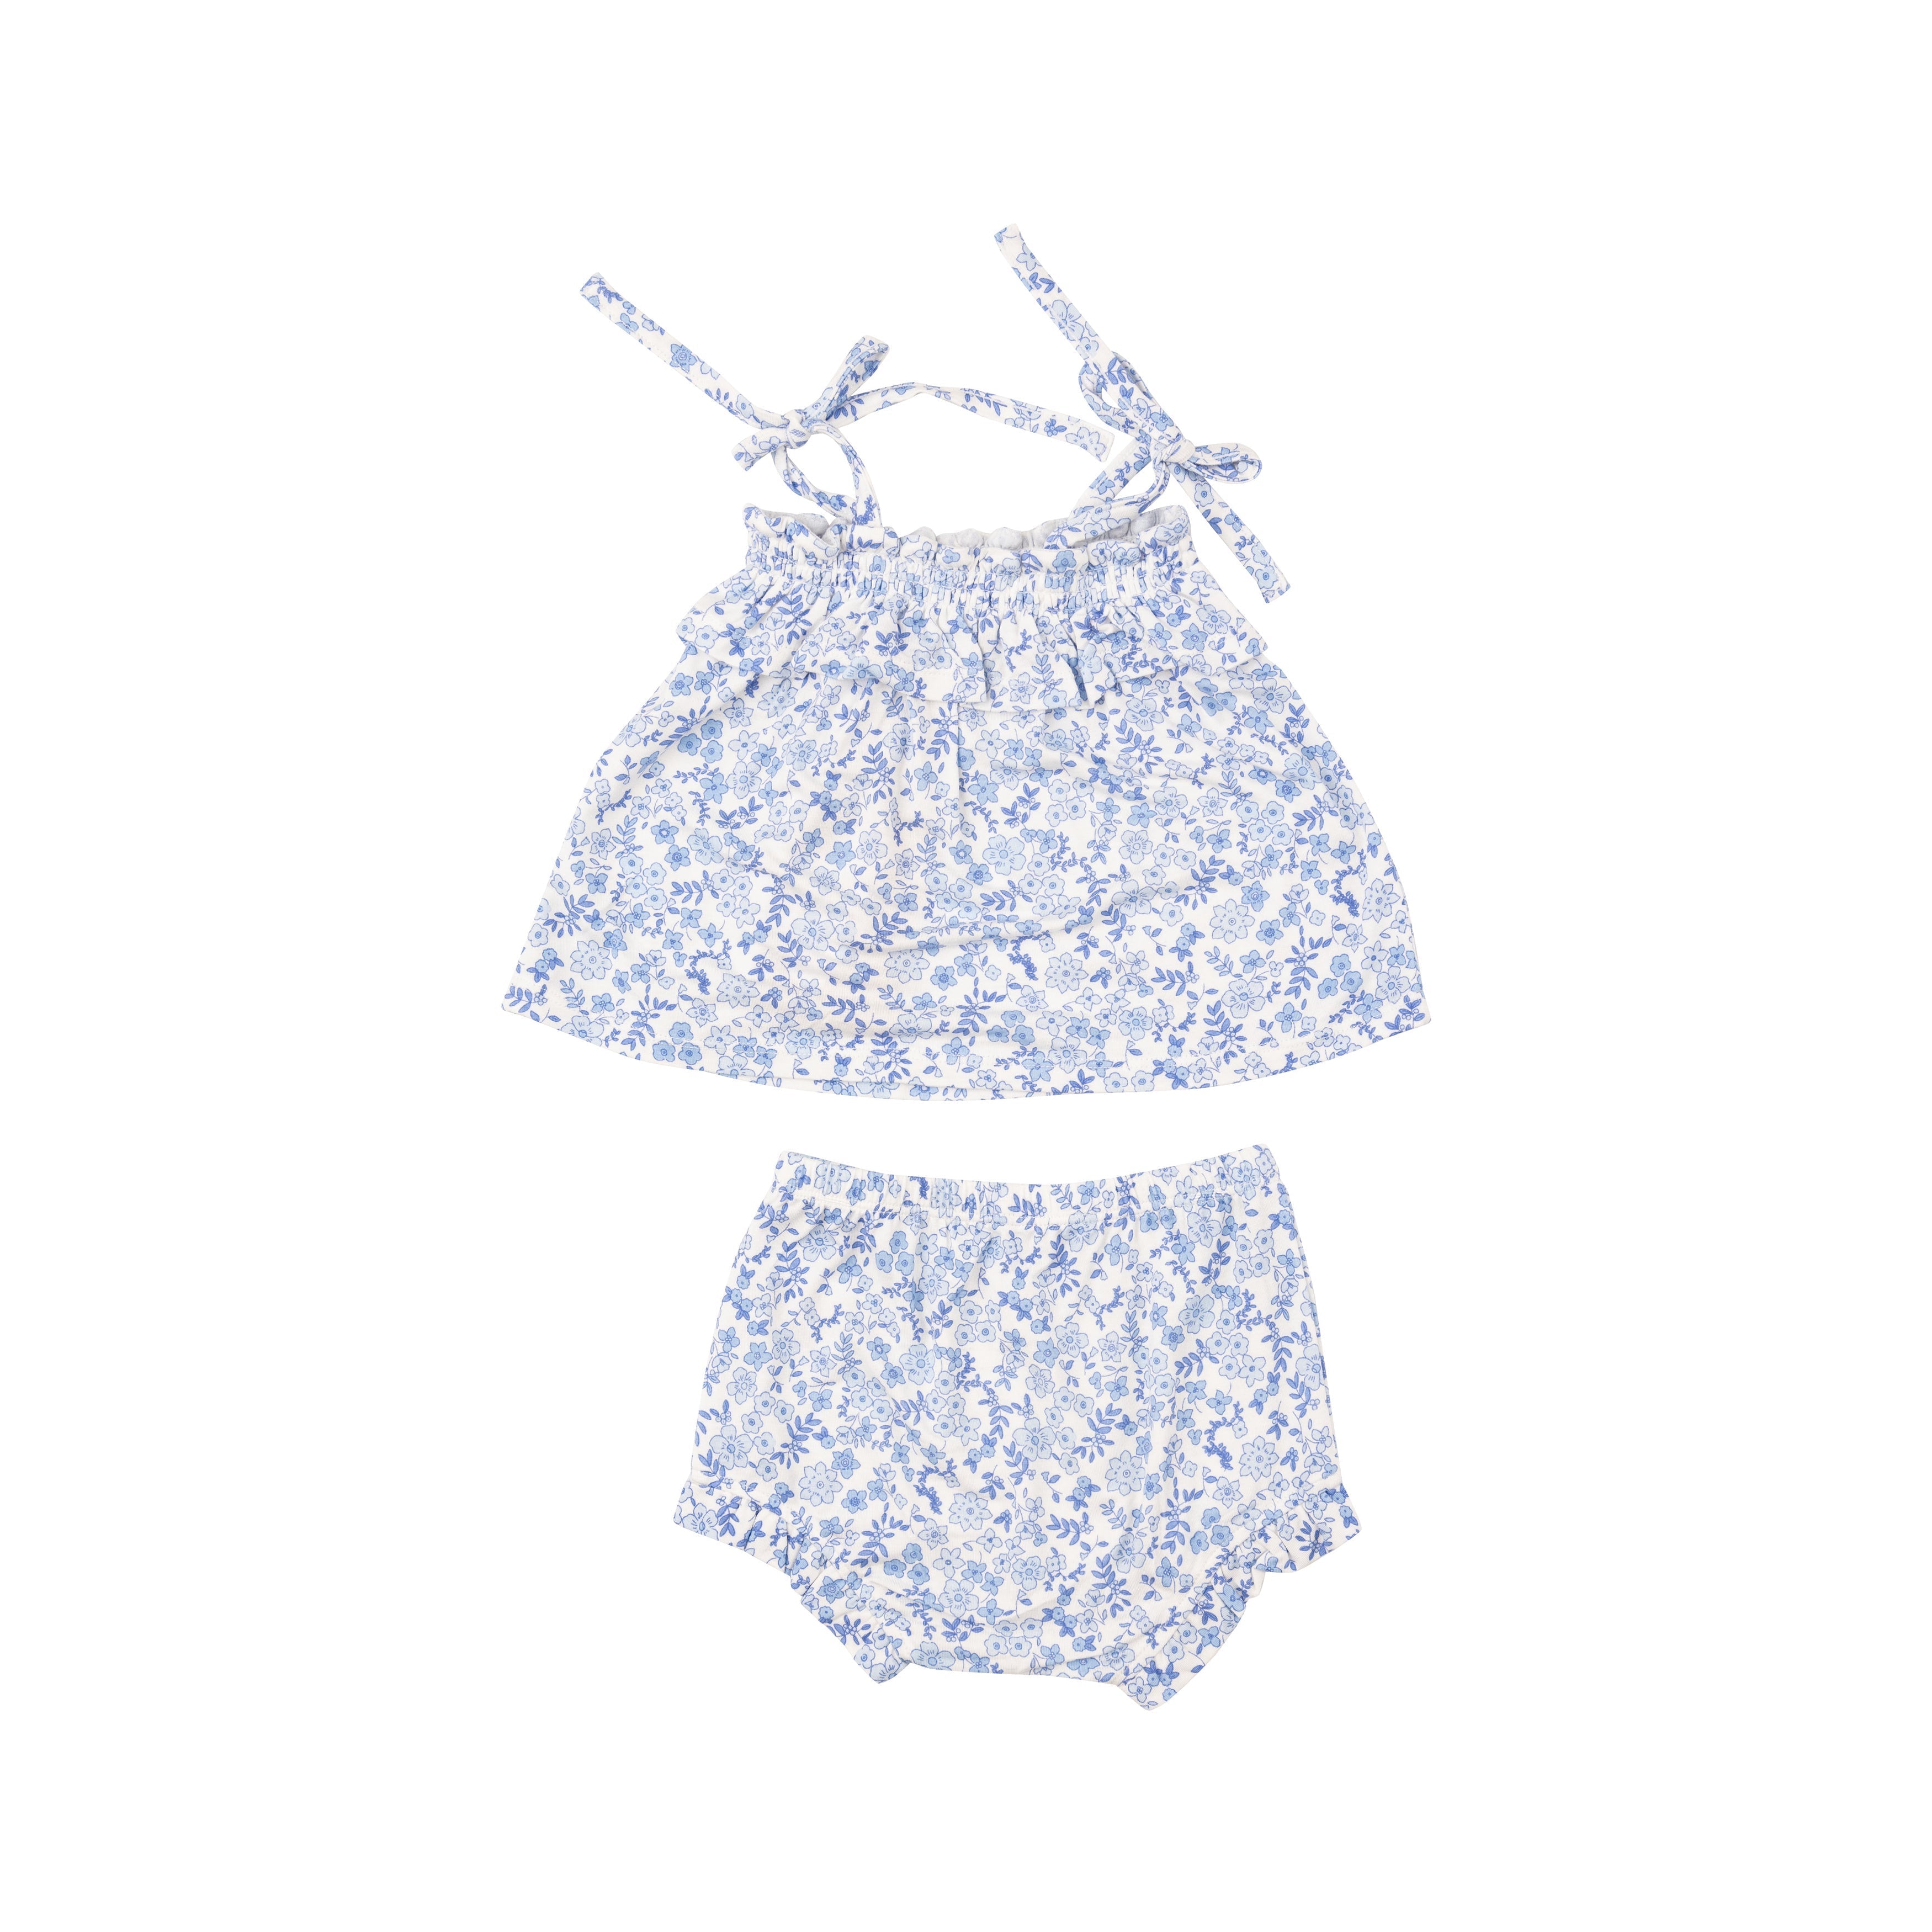 Ruffle Top & Bloomer - Blue Calico Floral